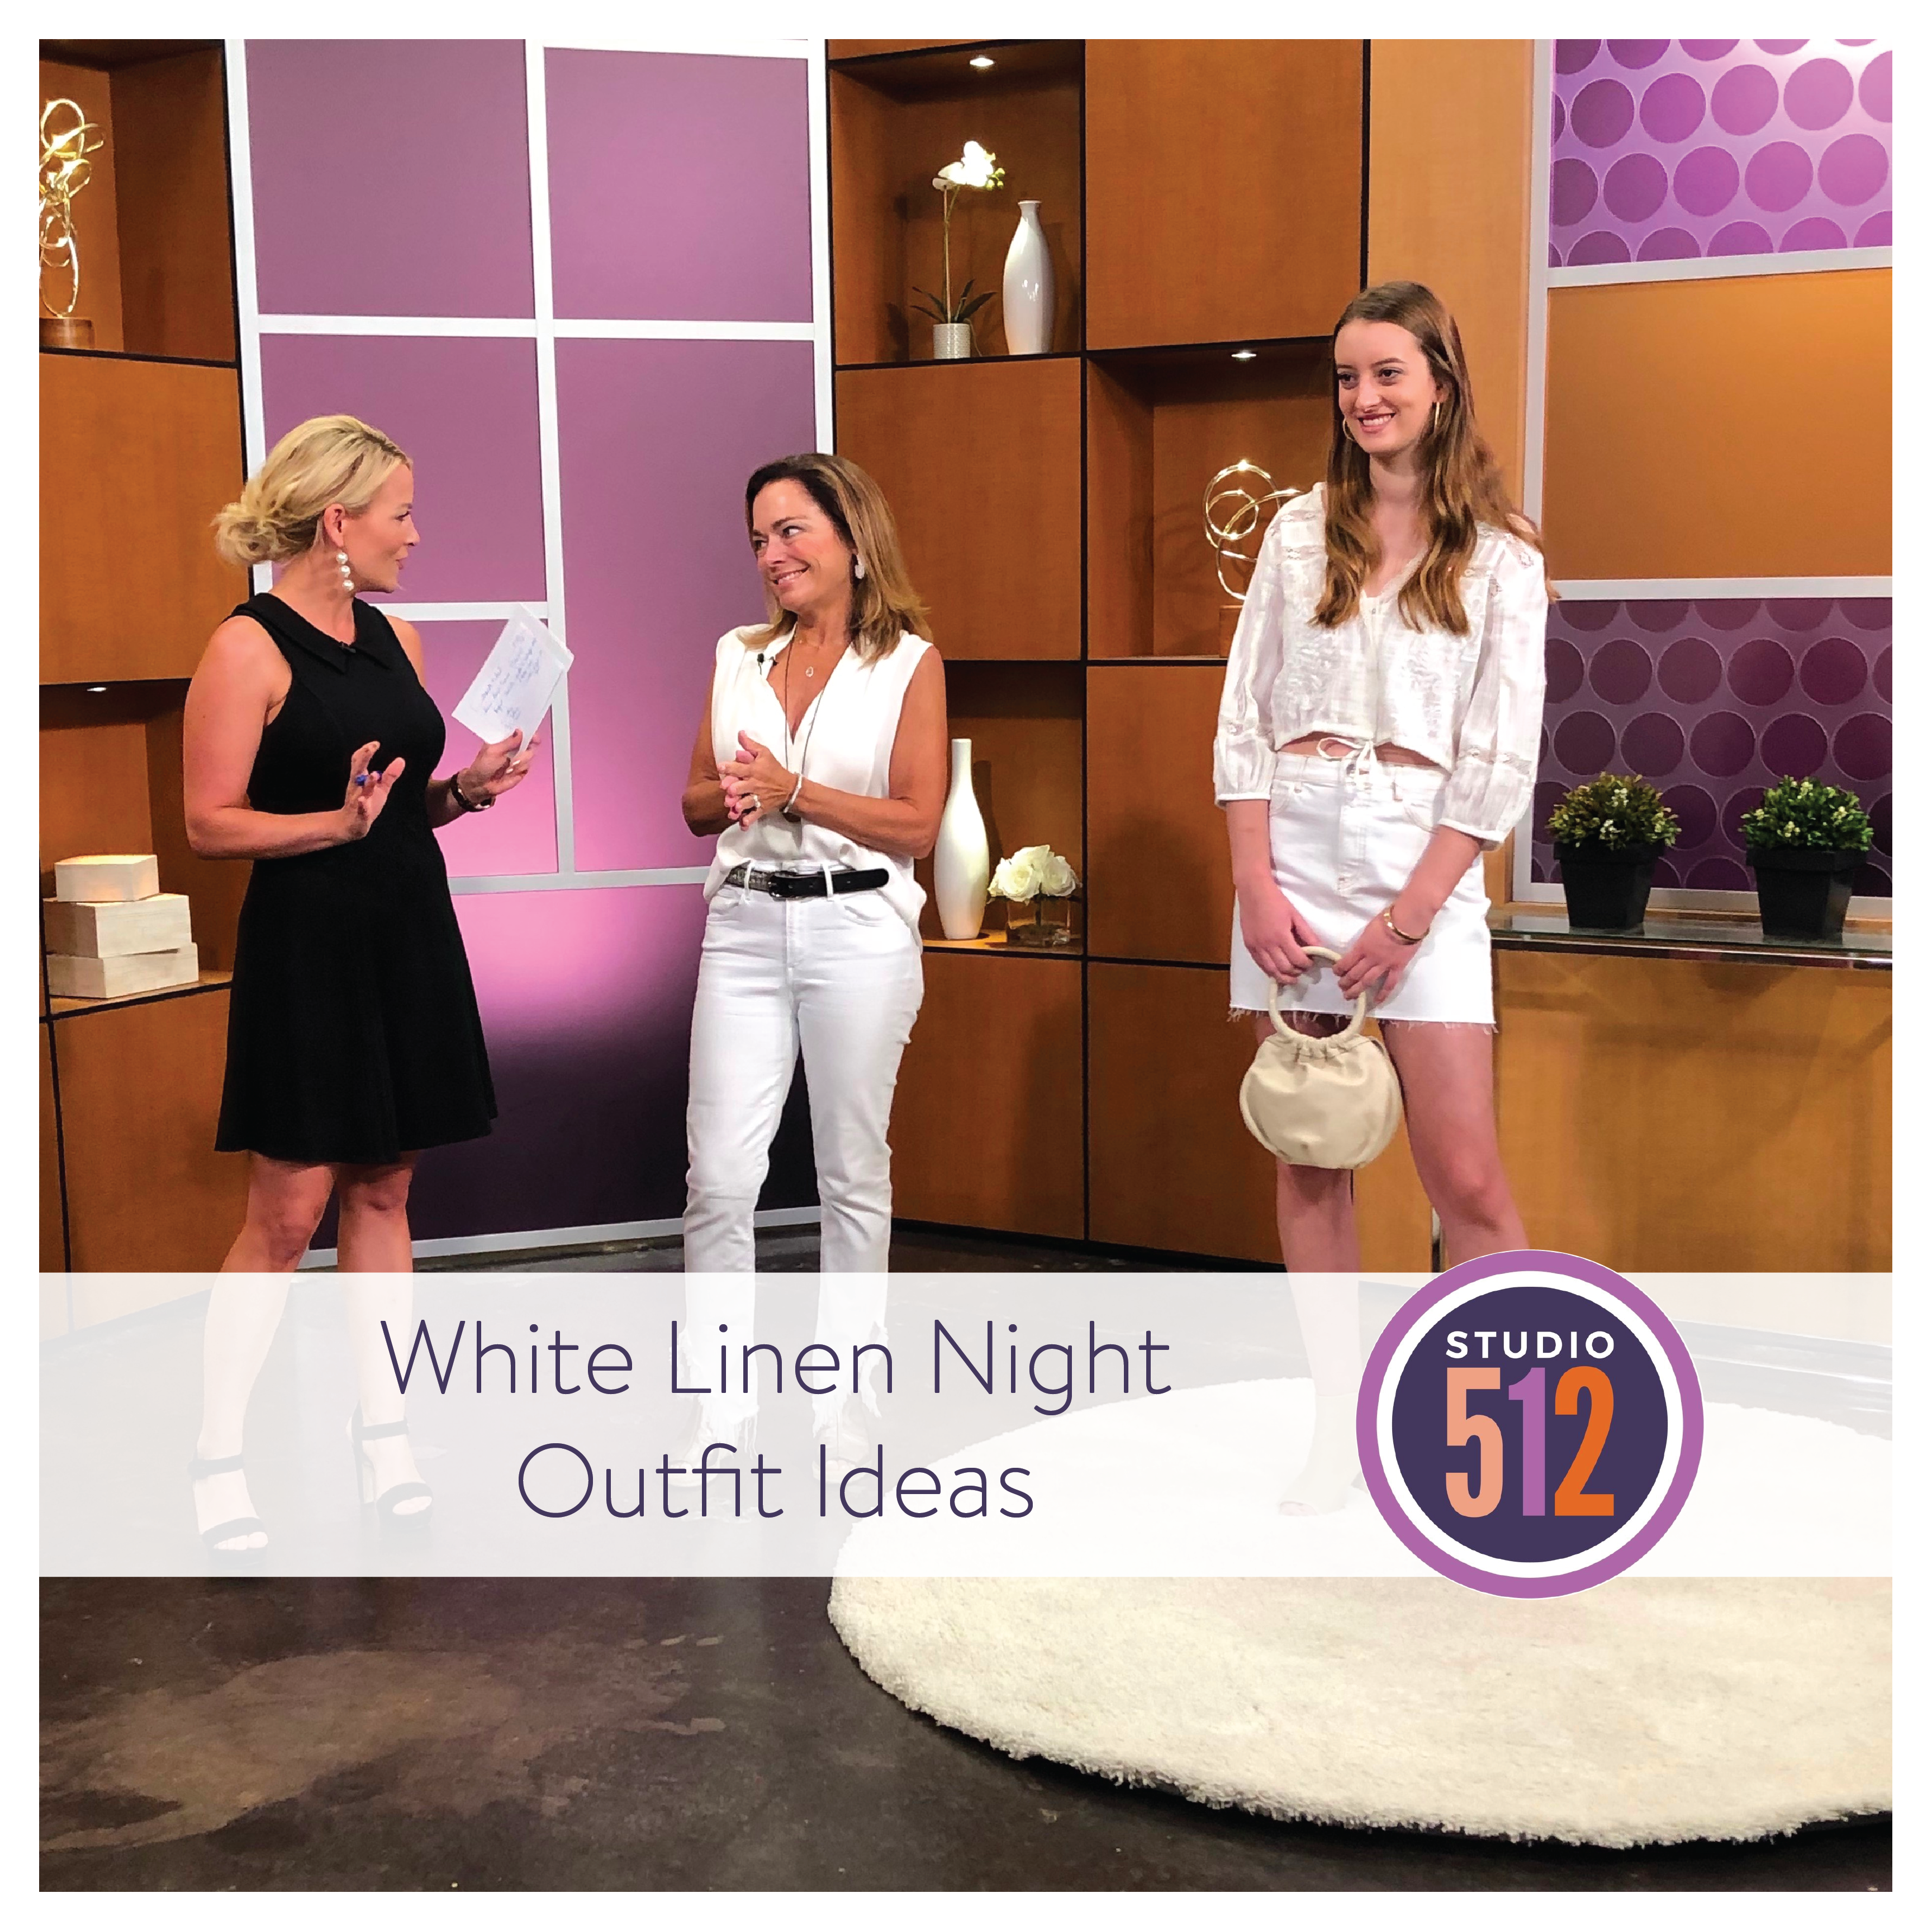 Austin KXAN Studio 512 White Linen Night Outfit Ideas with Susie Busch Transou of Hearth and Soul